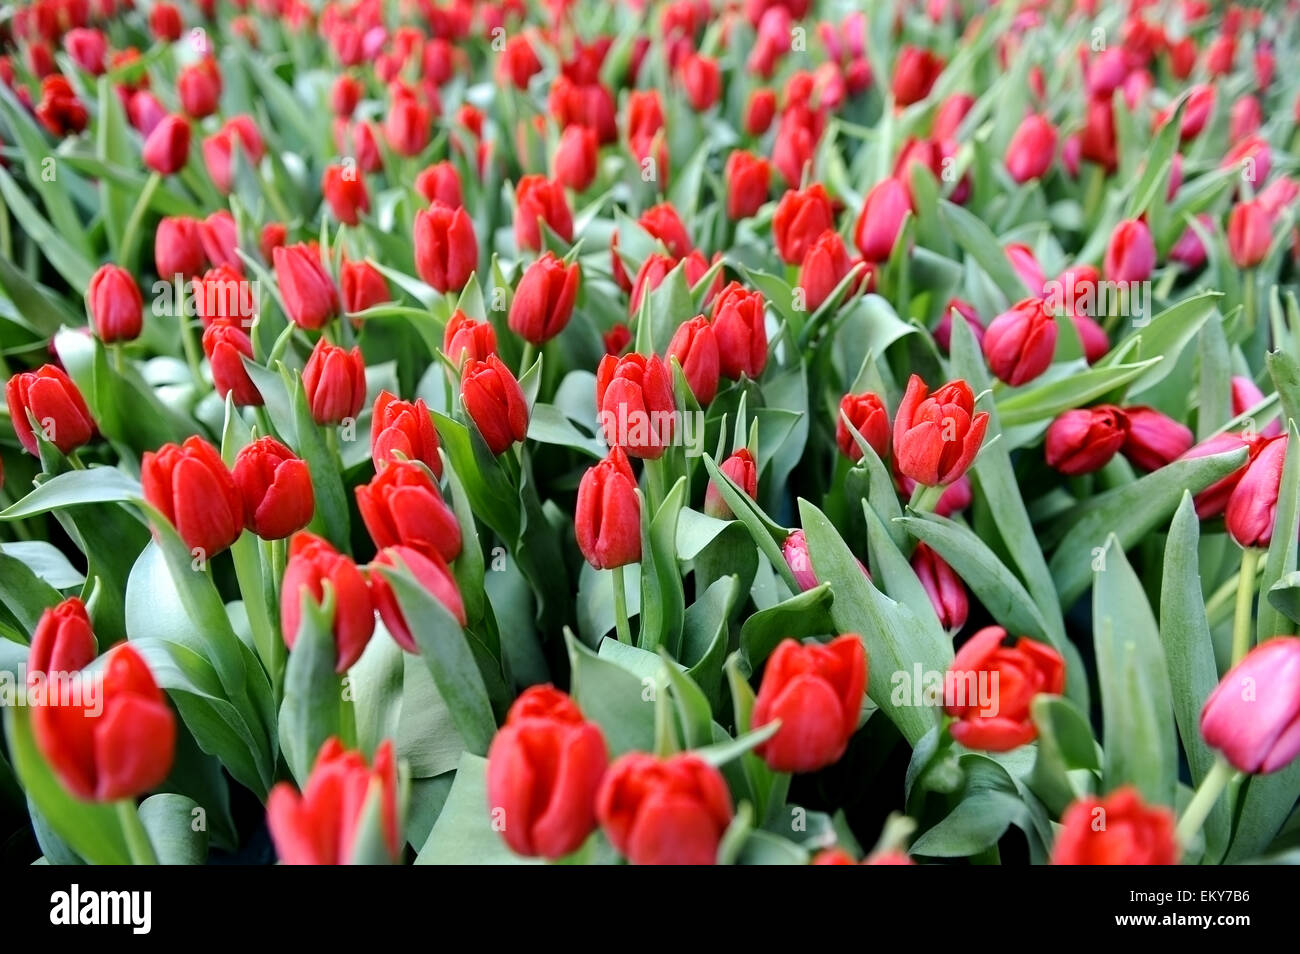 Spring shot with a field full of red tulips Stock Photo